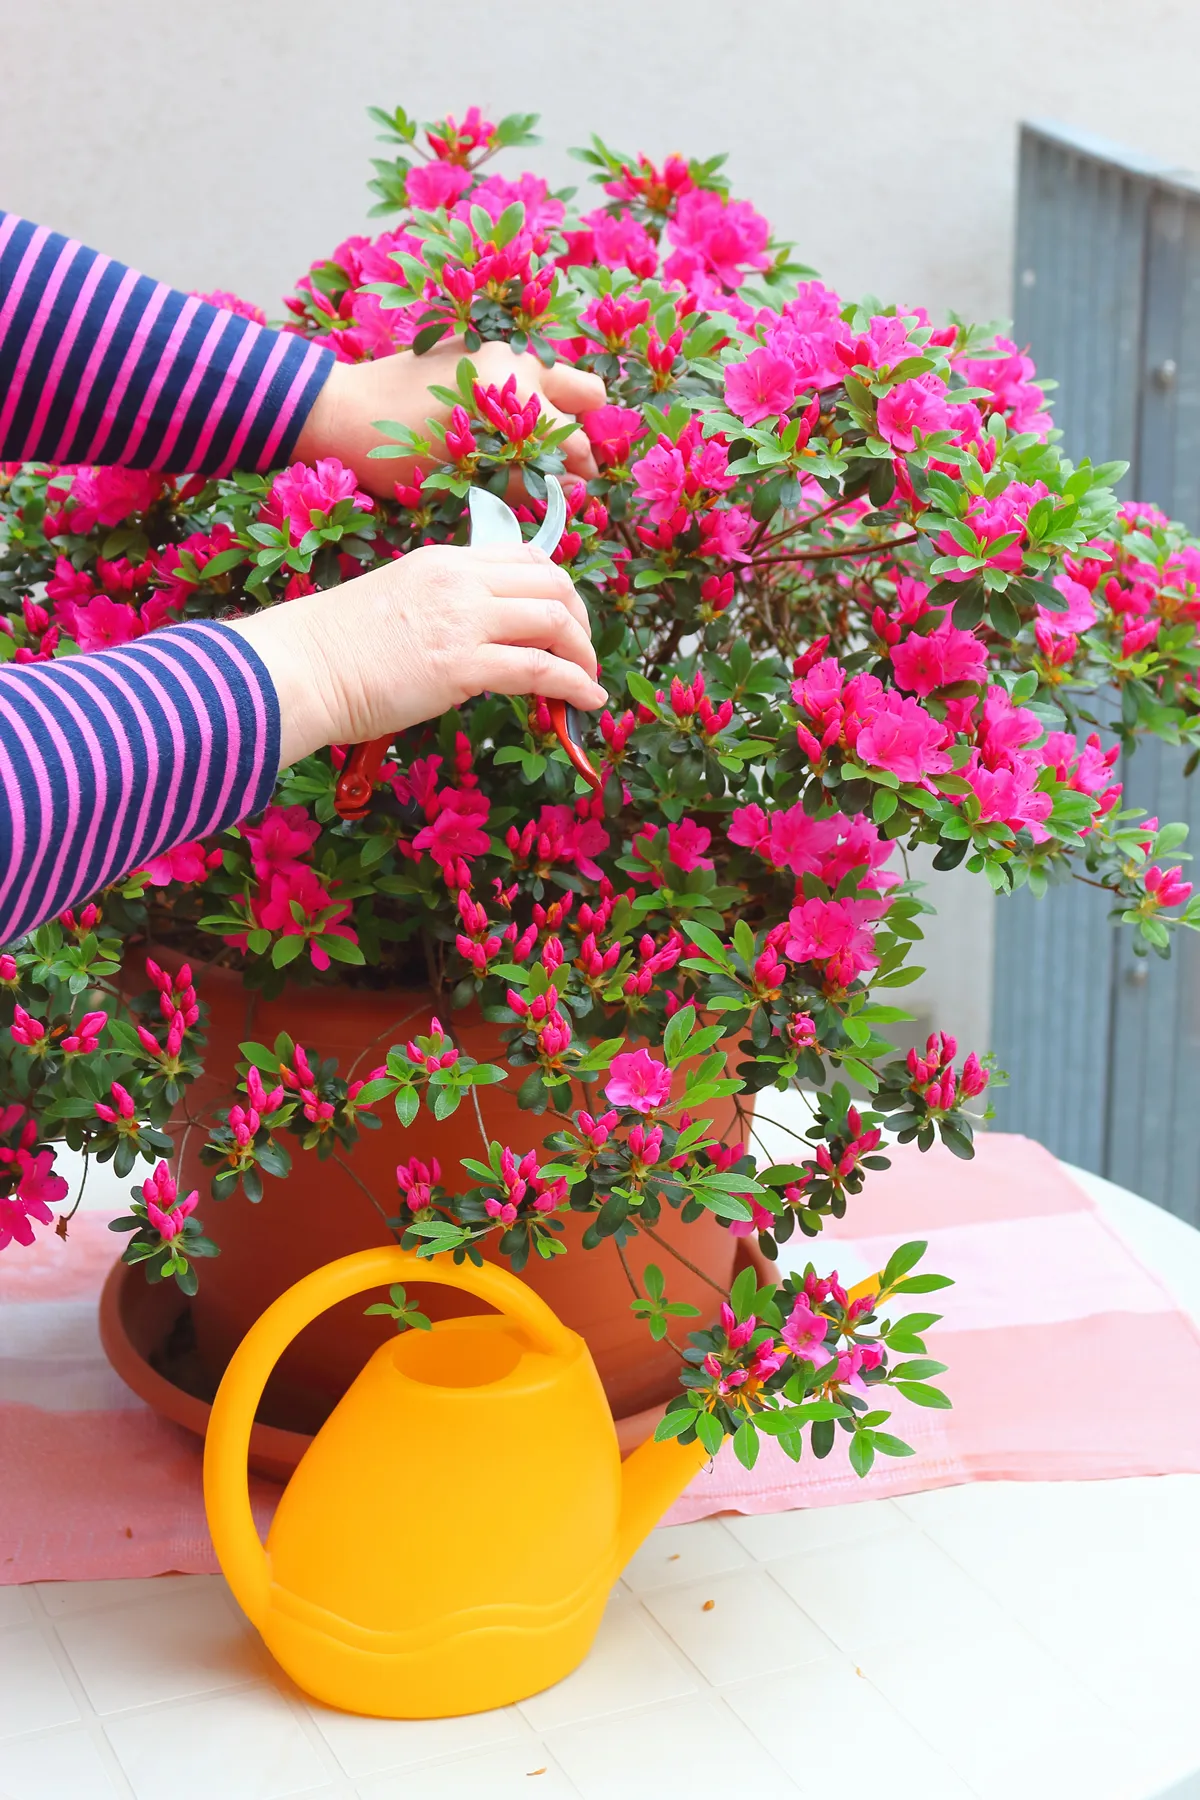 Blooming azalea with pink flowers in a pot on a white table, yellow watering can on the balcony. Pruning plants with garden shears. Hands holding garden shears.